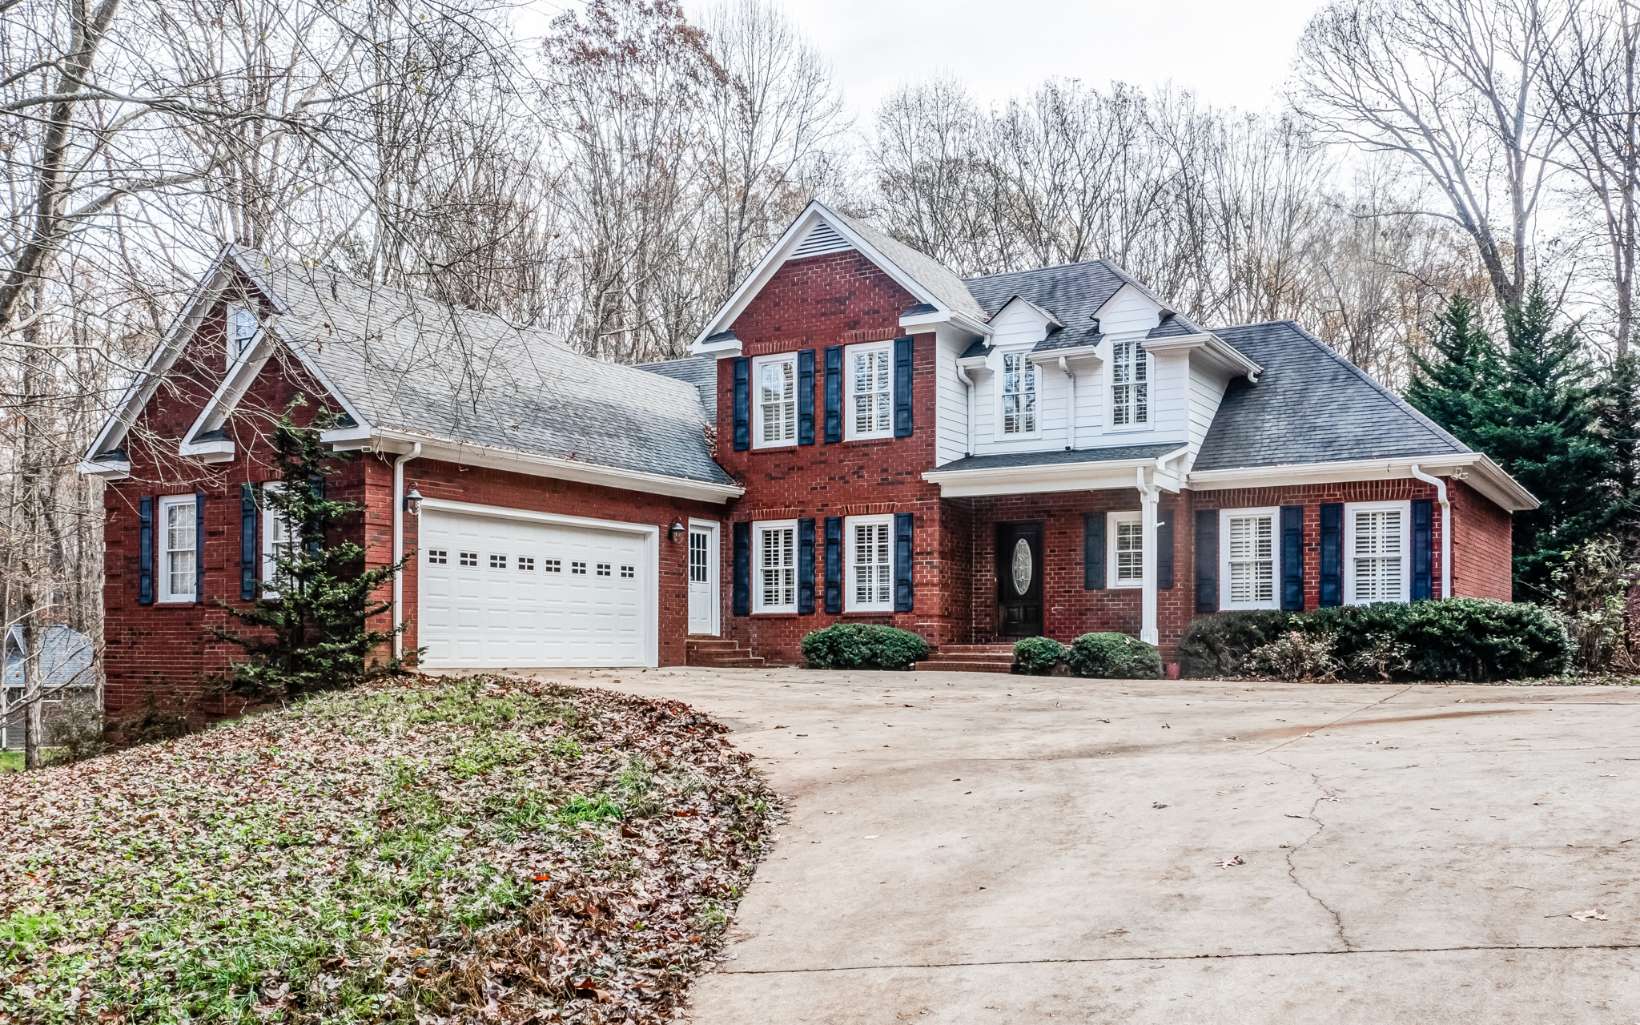 This thoughtfully designed home is in highly sought after gated Stegall Estates. This beautiful brick home has been lovingly maintained and is sure to impress! Main level has a formal dining room, large family room with a gas log fireplace, powder room, well appointed kitchen, with amazing prep space, a keeping room with the second of the three fireplaces in the home, and a screened in outdoor sitting area, over looking the fenced in back yard and the salt water pool. Upstairs you have three bedrooms, and a full bathroom, and downstairs, you have an expansive living room with that third fireplace and game room, complete with a pool table and bar area! The last and fifth bedroom is on this level and is large with a walk in closet and and a full bath as well on this level. There is also an enclosed work shop in the basement. From this level, you will access your salt water pool deck, fenced in back yard, and during the spring and summer the hydrangeas and rose bushes just come alive in all their fragrant glory! 130 Stegall Dr is a true gem, offering a beautiful silhouette, massive amounts of storage and room to spread out.